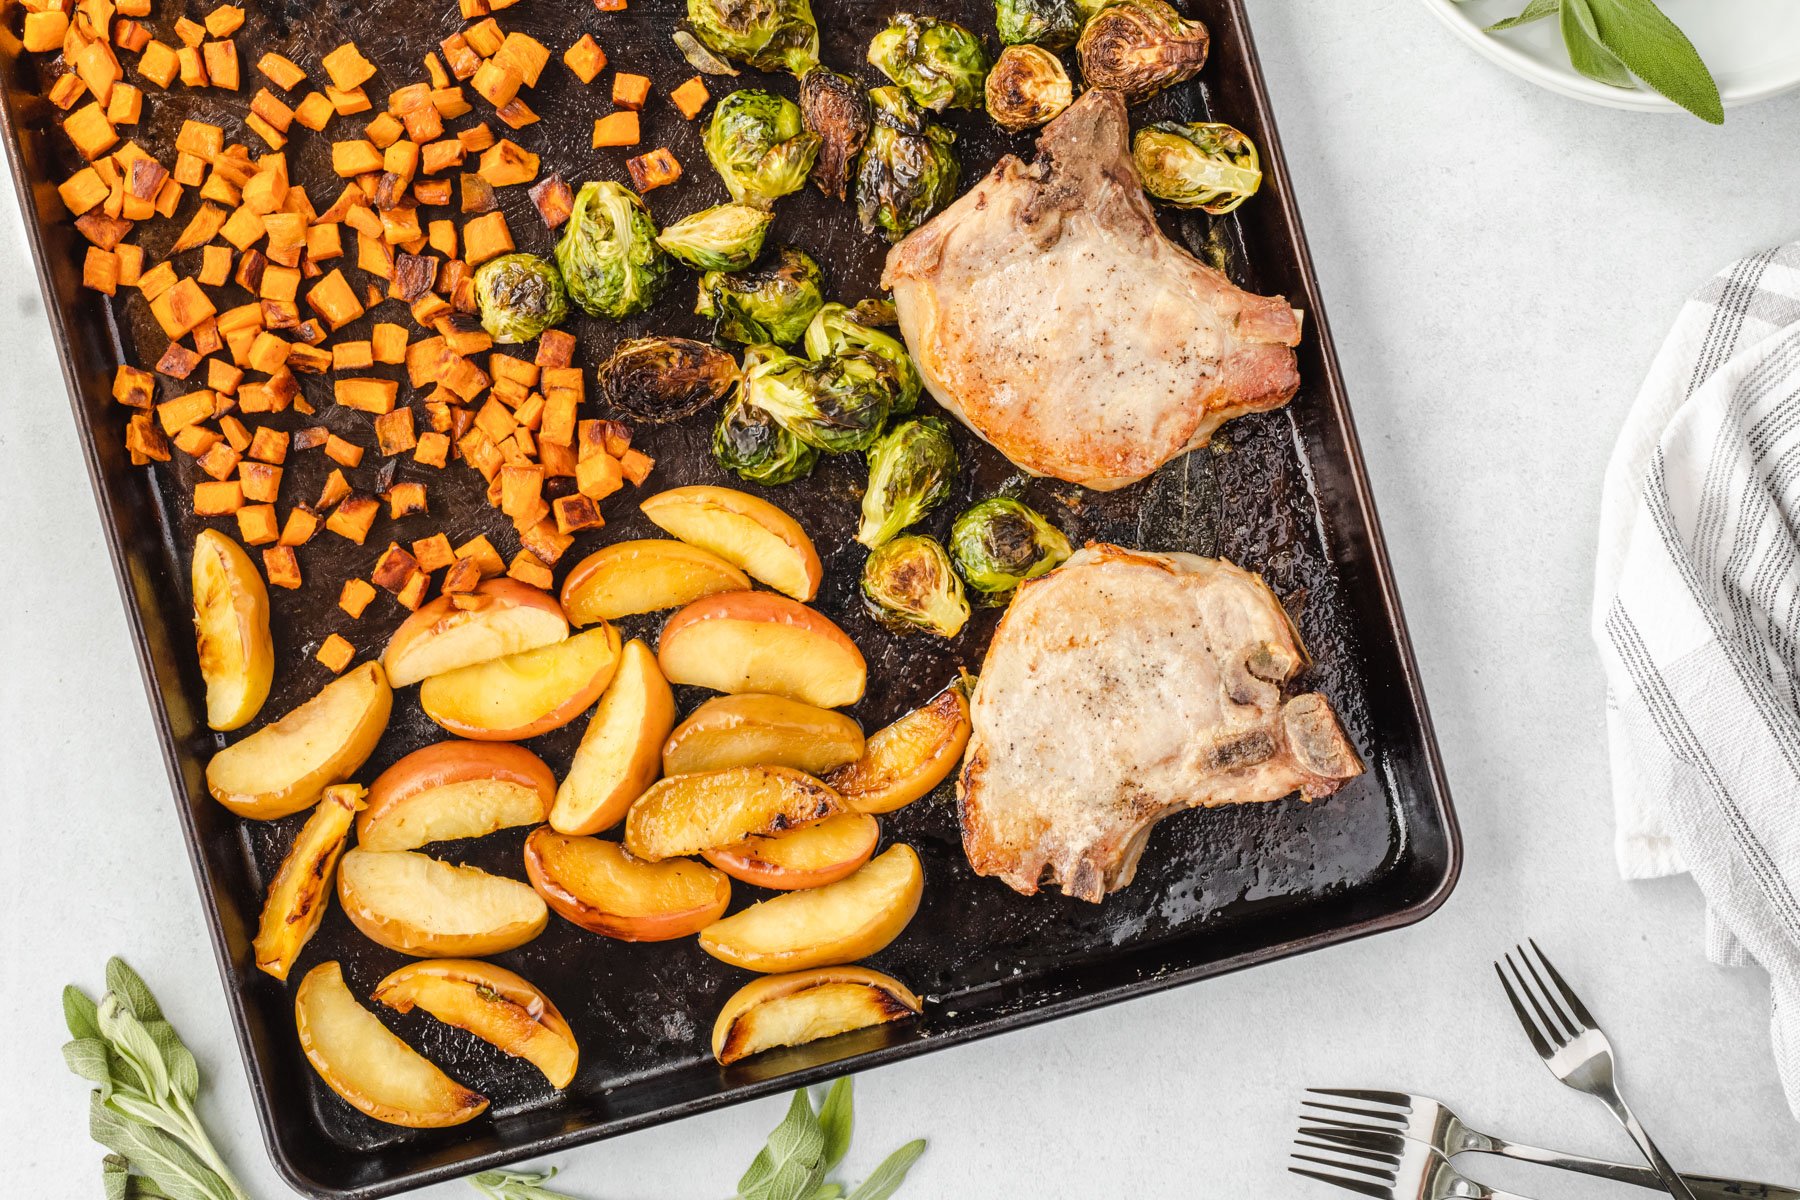 Sheet pan angled with roasted dinner on it, and sage leaves framing the pan.